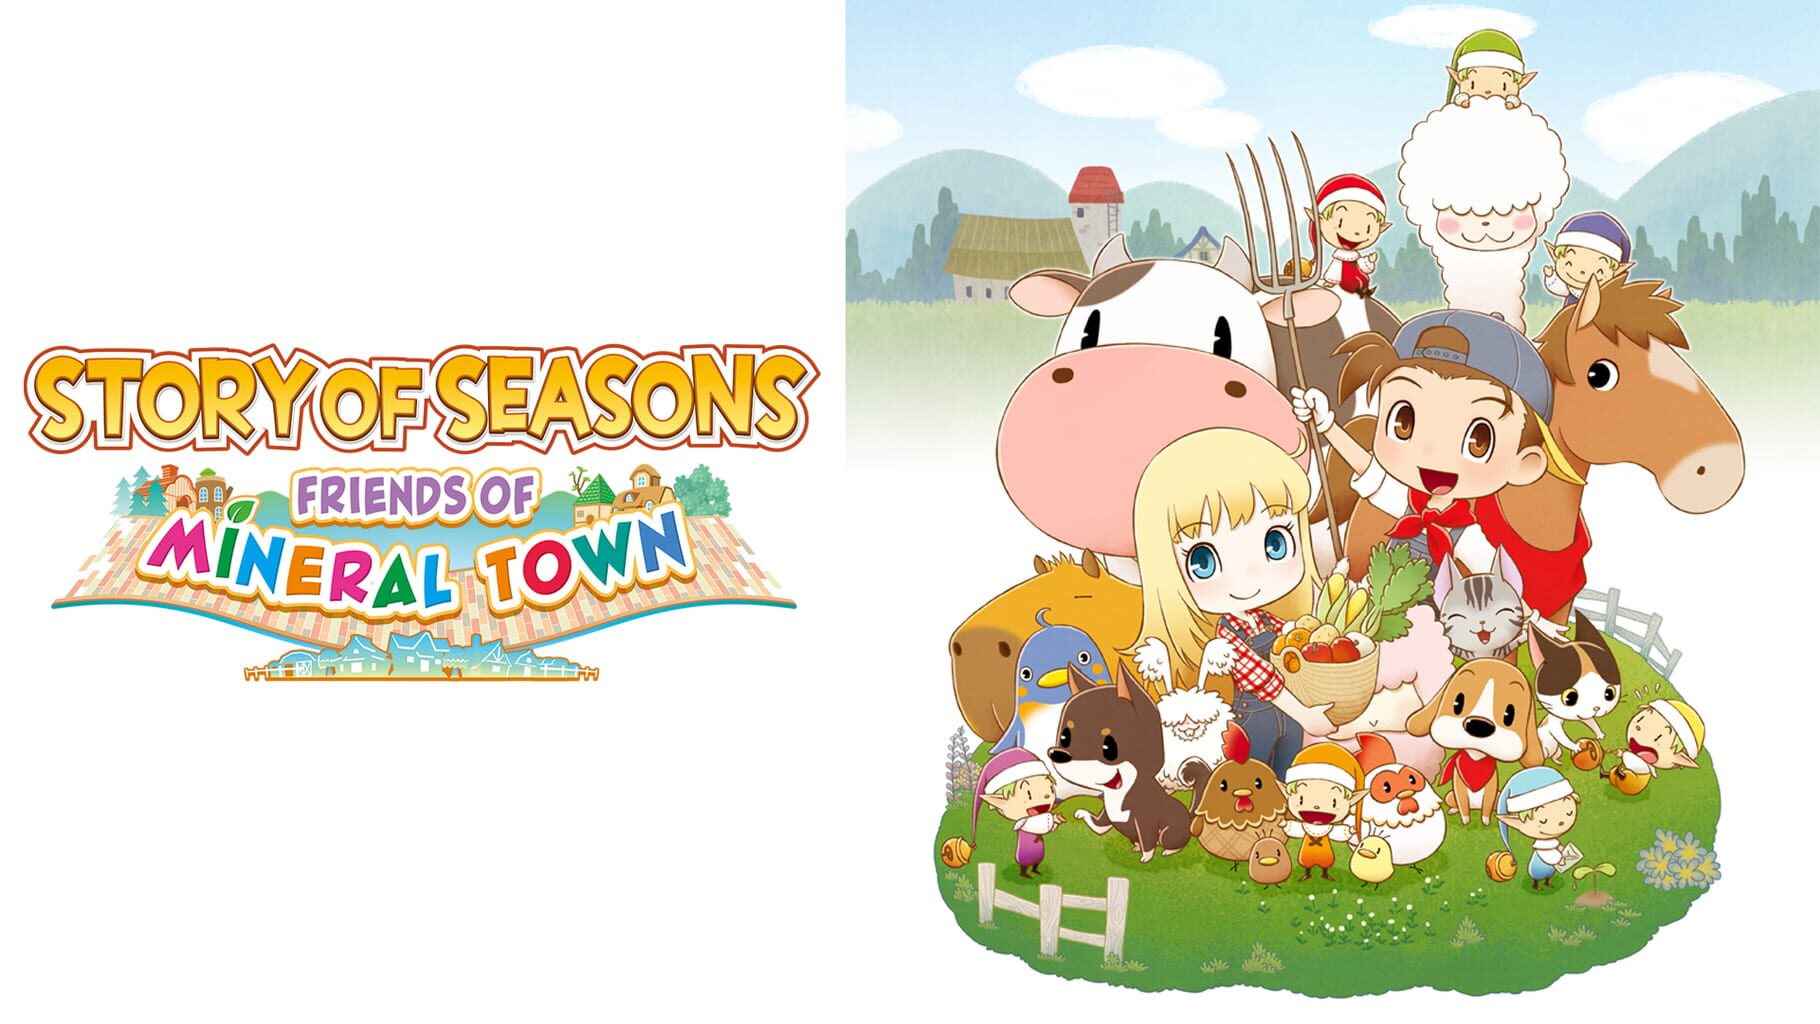 Artwork for Story of Seasons: Friends of Mineral Town